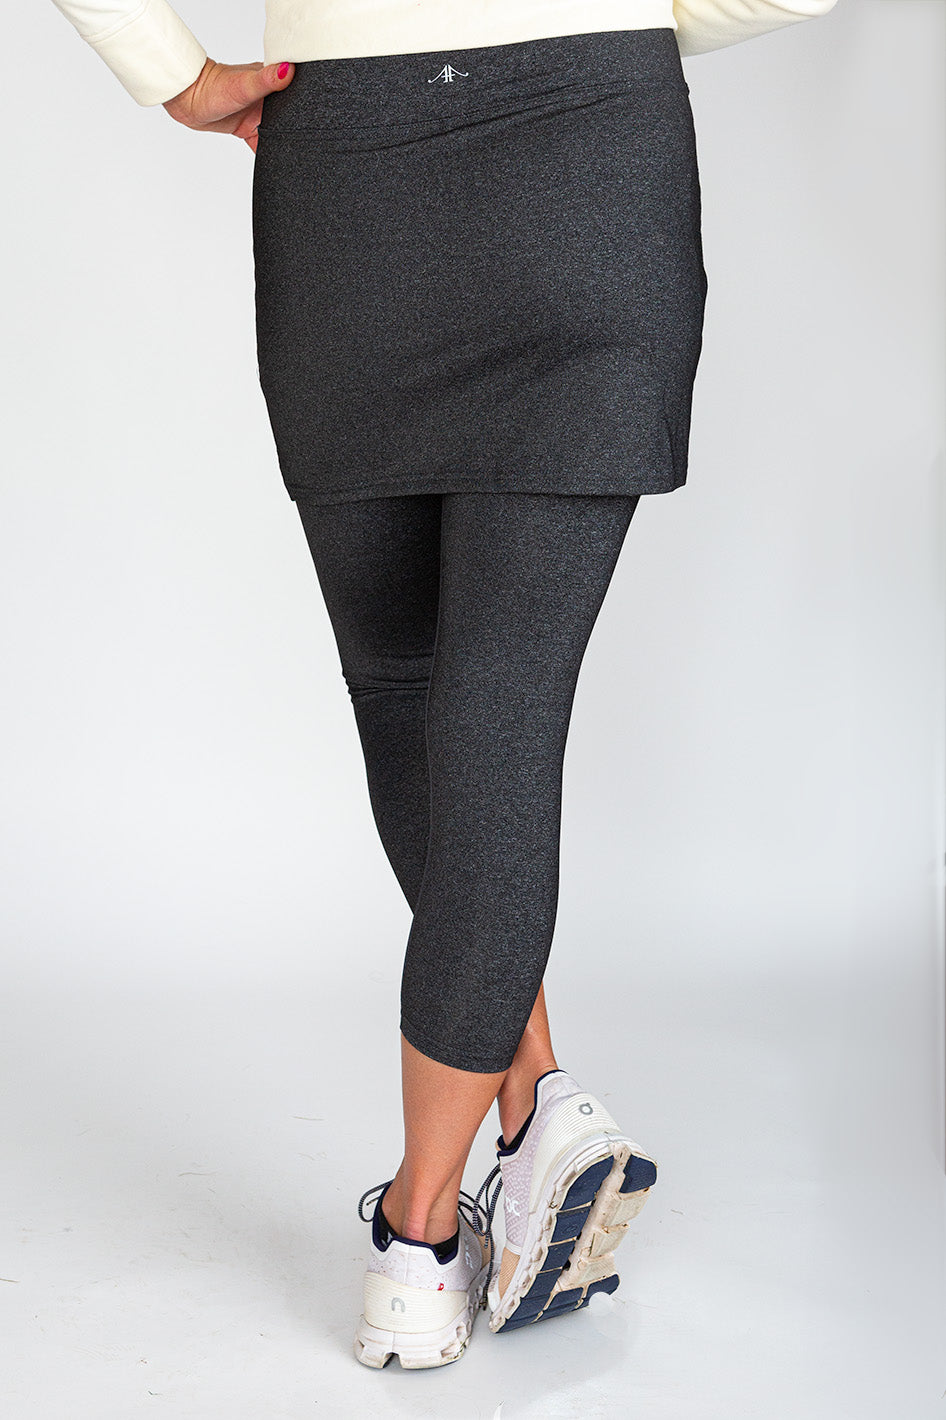 Buy Tennis Skirts with Leggings for Women Skirted Leggings with Pockets  Capris with Skirts with Pants Sports Leggings with Skirts Black M at  Amazon.in